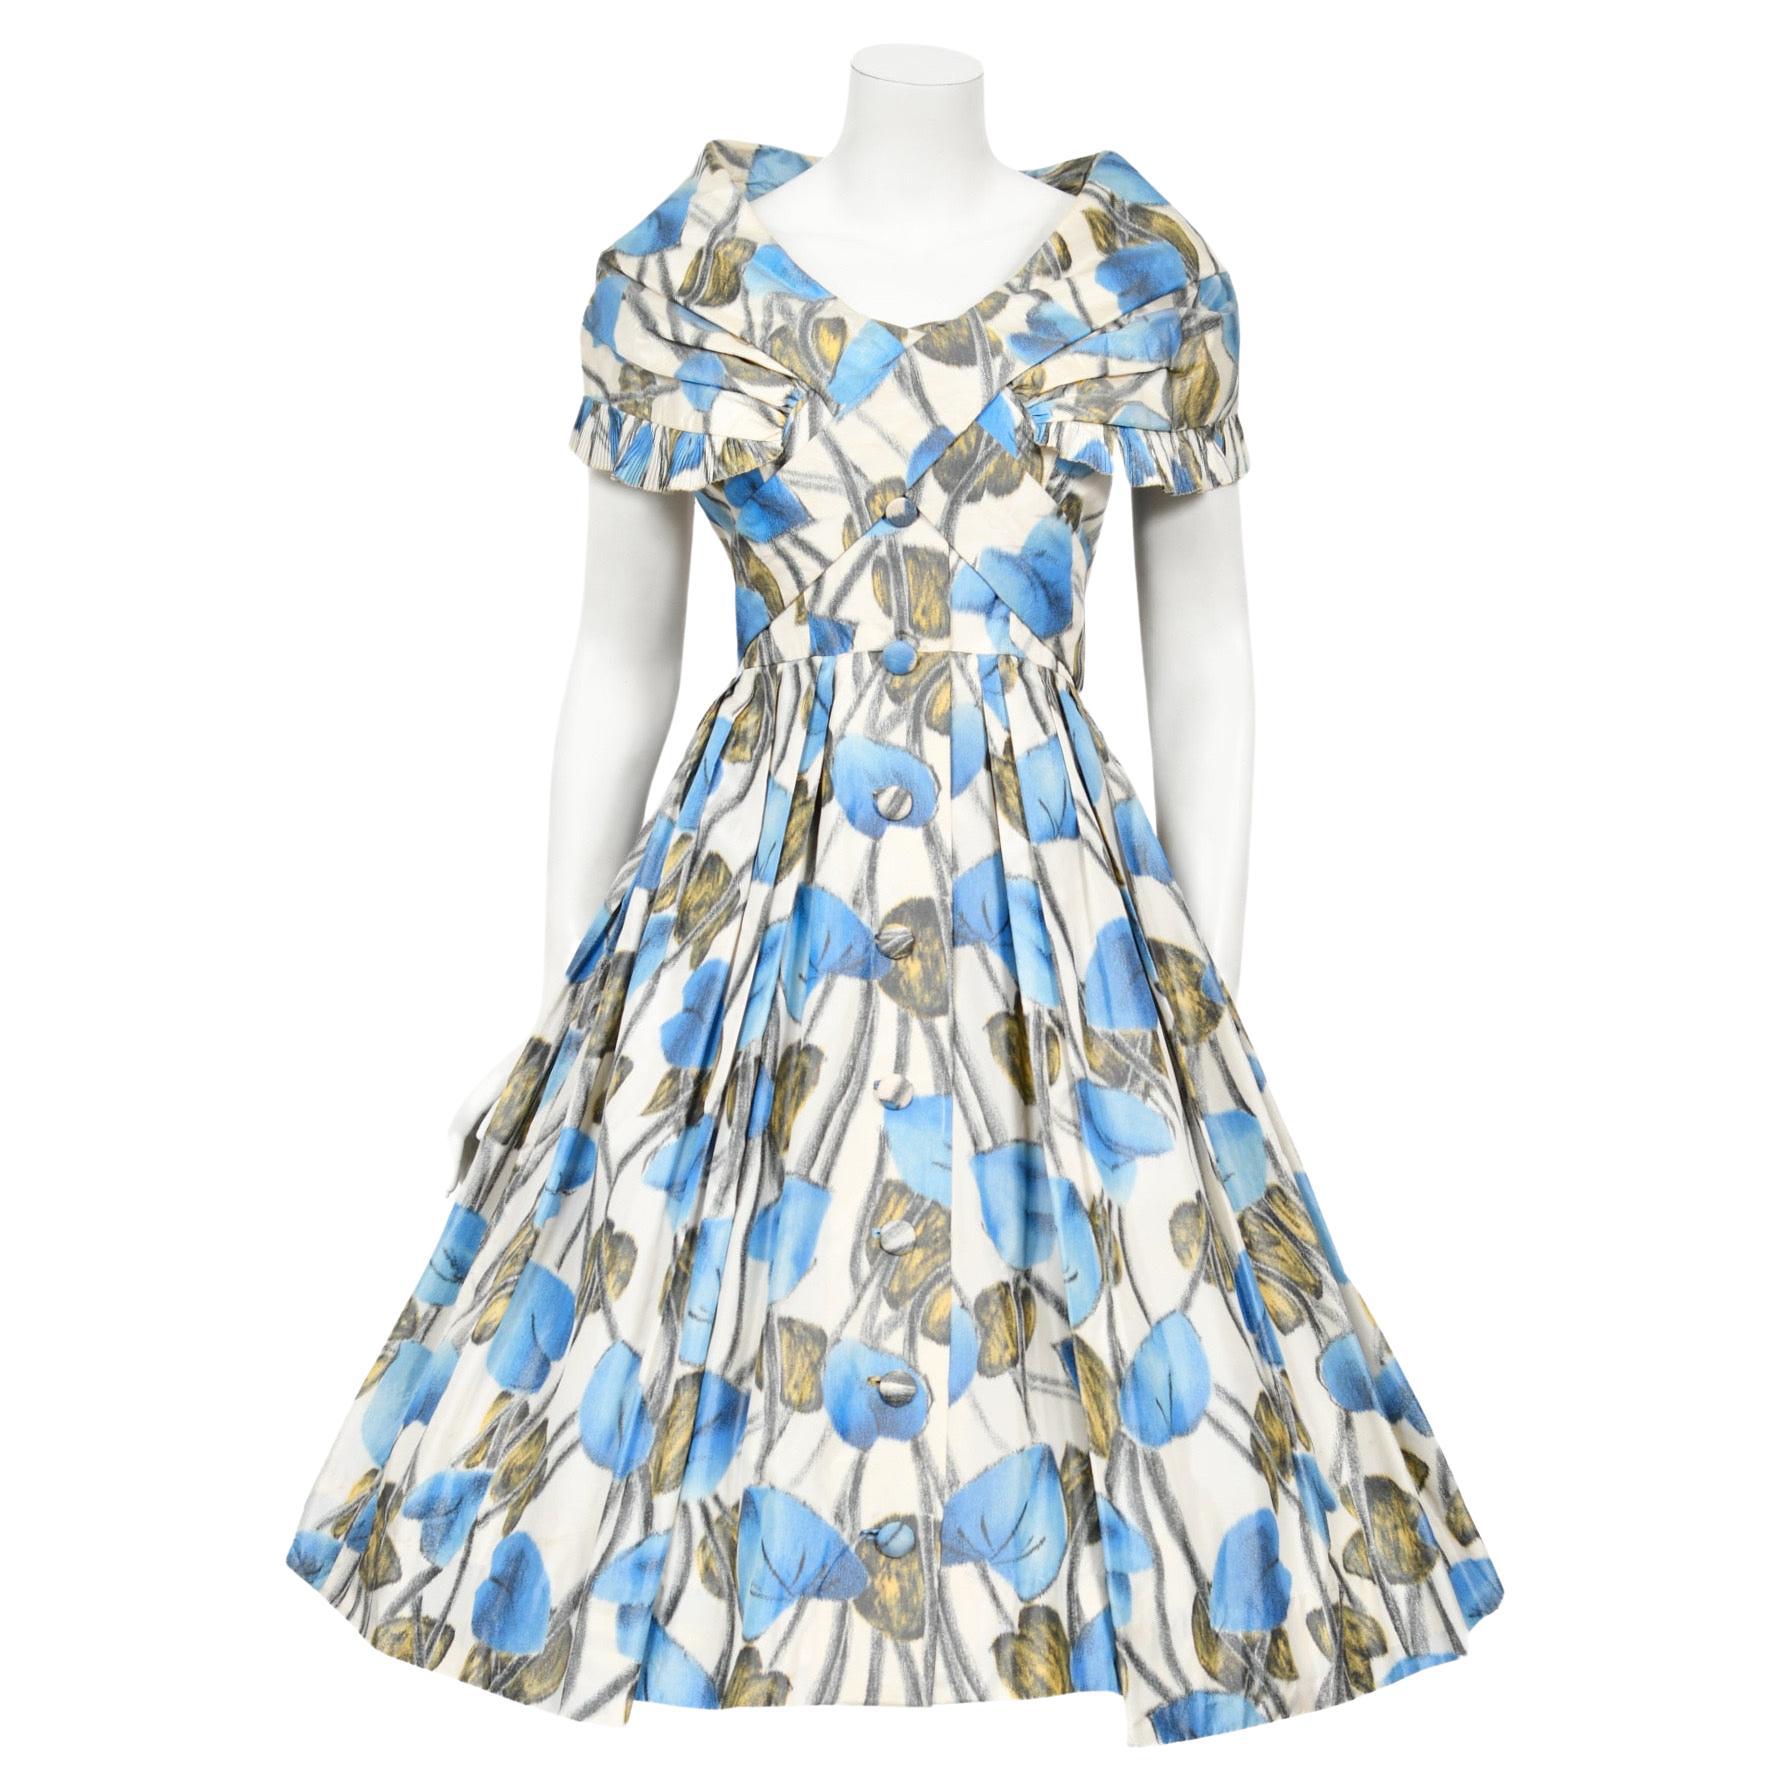 Rare 1956 Christian Dior Couture Blue Floral Silk Portrait Collar New Look Dress For Sale